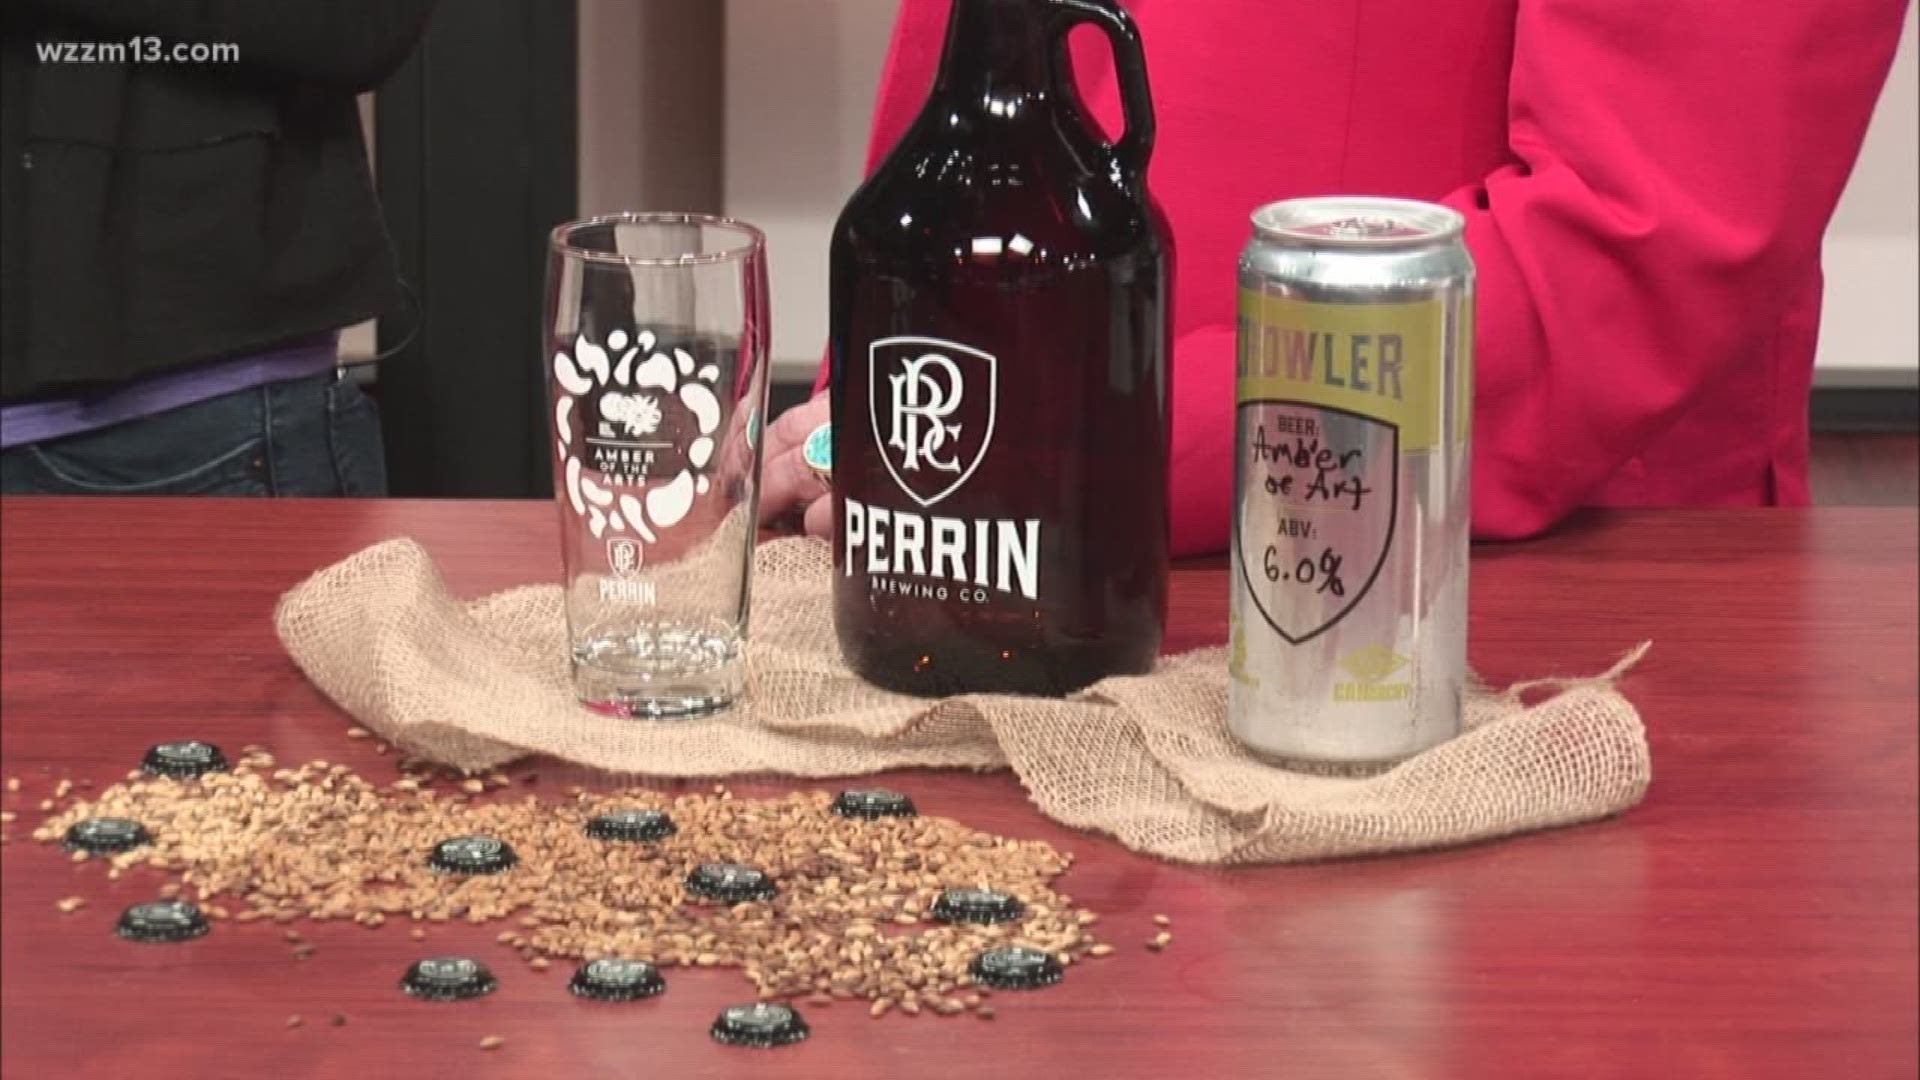 Grand Rapids Festival of the Arts is taking place June 7-9, 2019, and this year, Perrin Brewing is getting in on the fun. Amber of the Arts is a special brew from Perrin  for the 50th celebration.